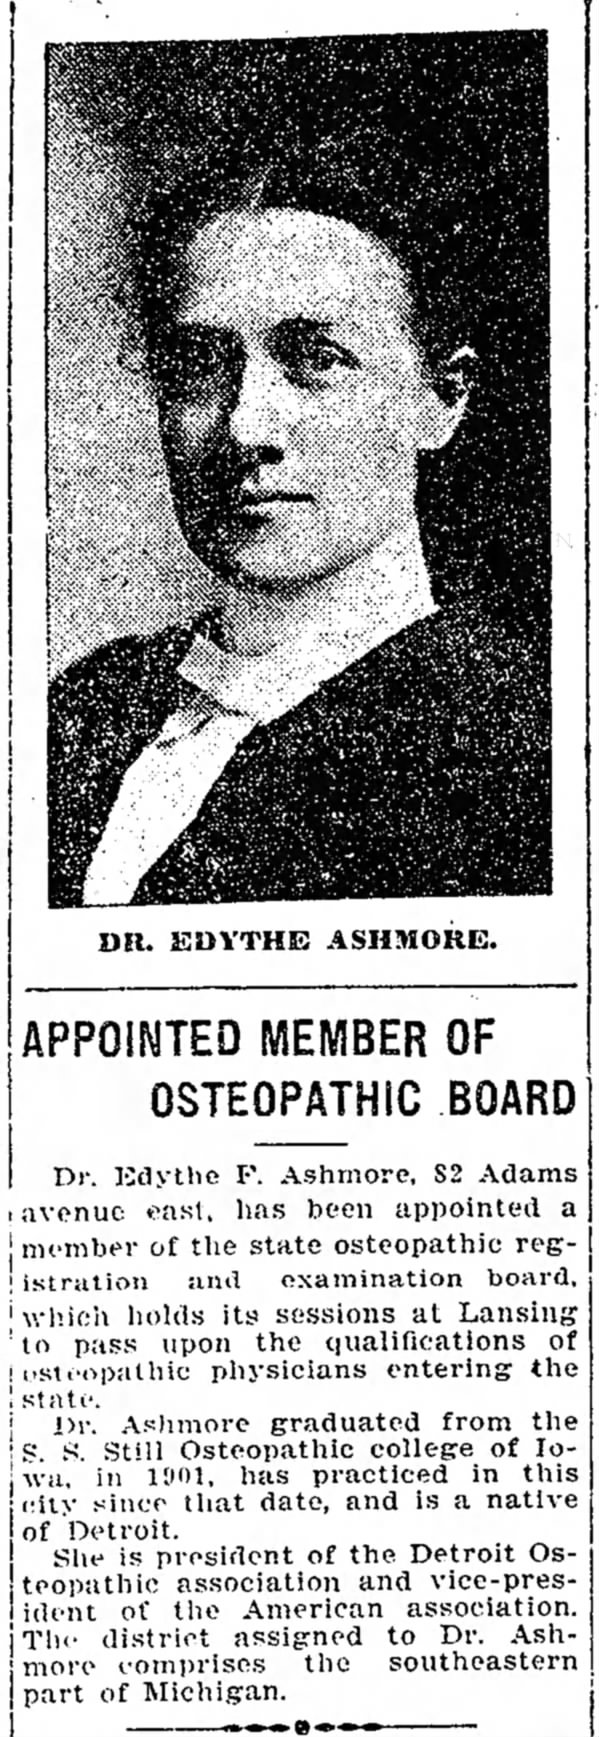 1906-12-01 Dr. Edythe Ashmore appointed member of osteopathic board